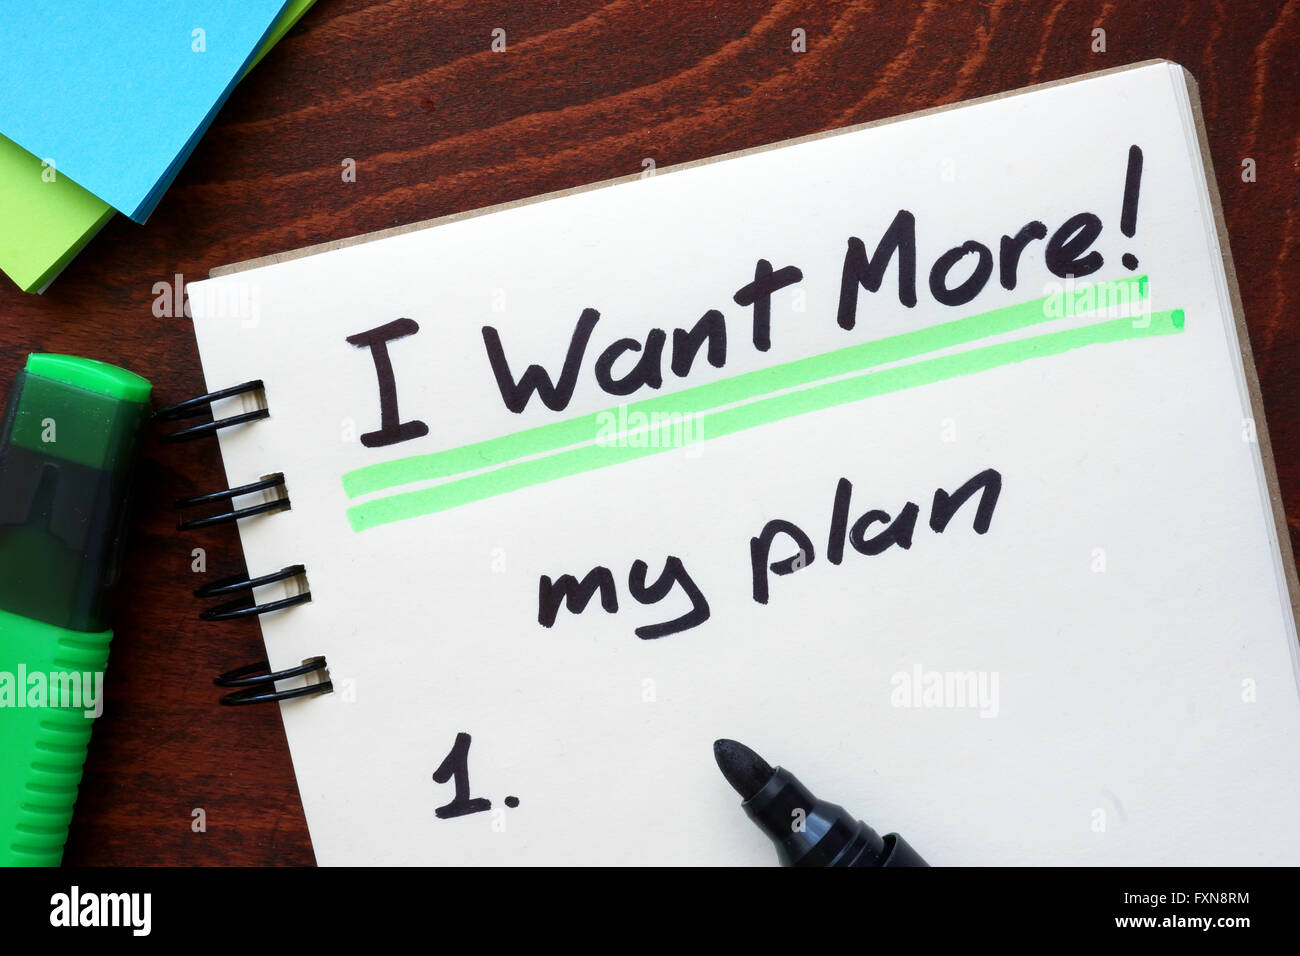 I Want More My plan written in a notebook. Motivation concept. Stock Photo